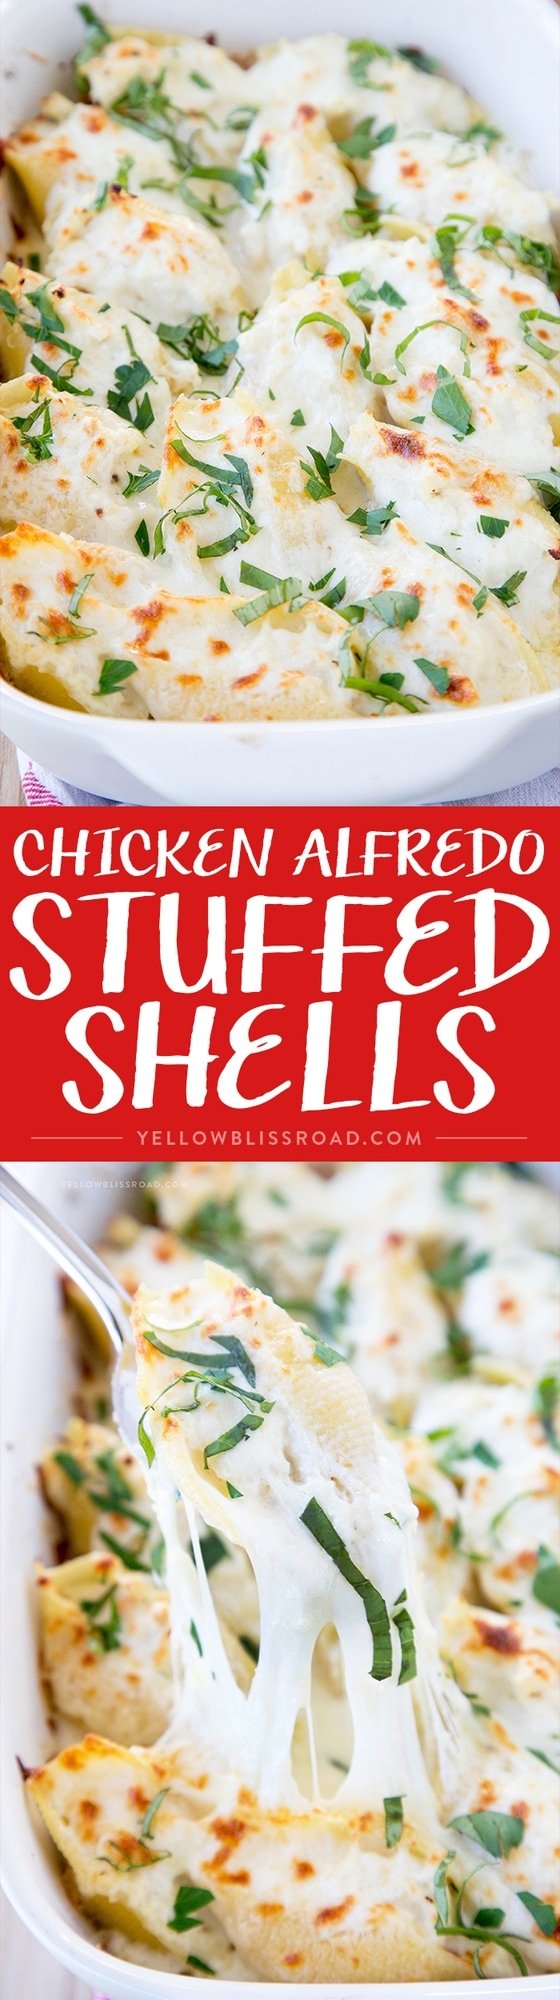 Chicken Alfredo Stuffed Shells - Creamy and Rich Pasta dish with a homemade simple Alfredo sauce, chicken Italian cheeses and Ricotta